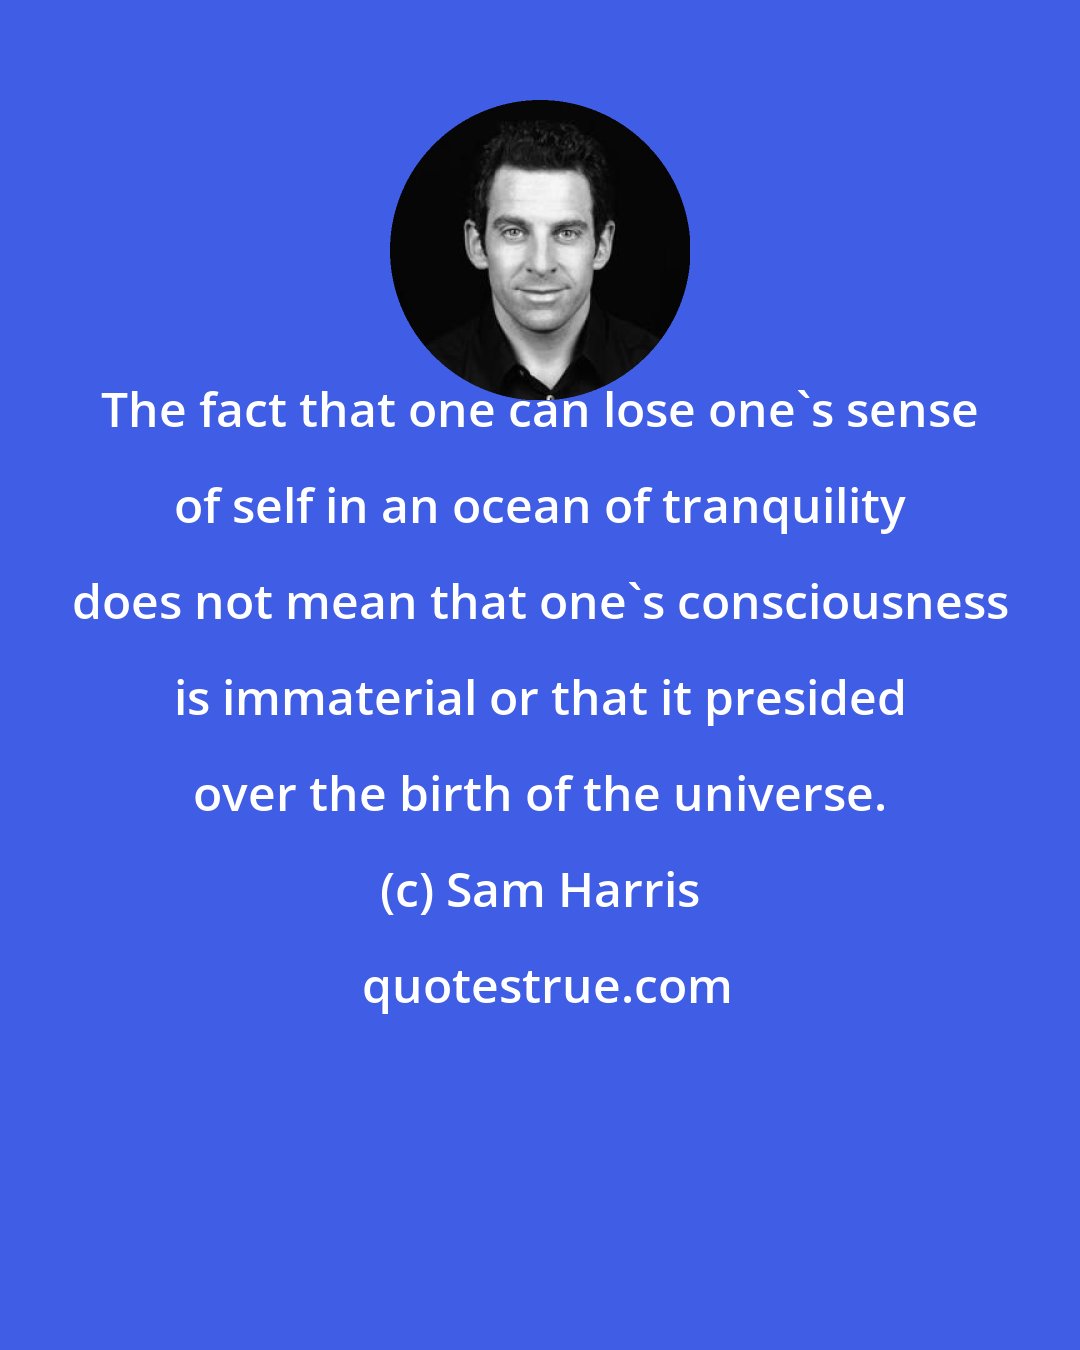 Sam Harris: The fact that one can lose one's sense of self in an ocean of tranquility does not mean that one's consciousness is immaterial or that it presided over the birth of the universe.